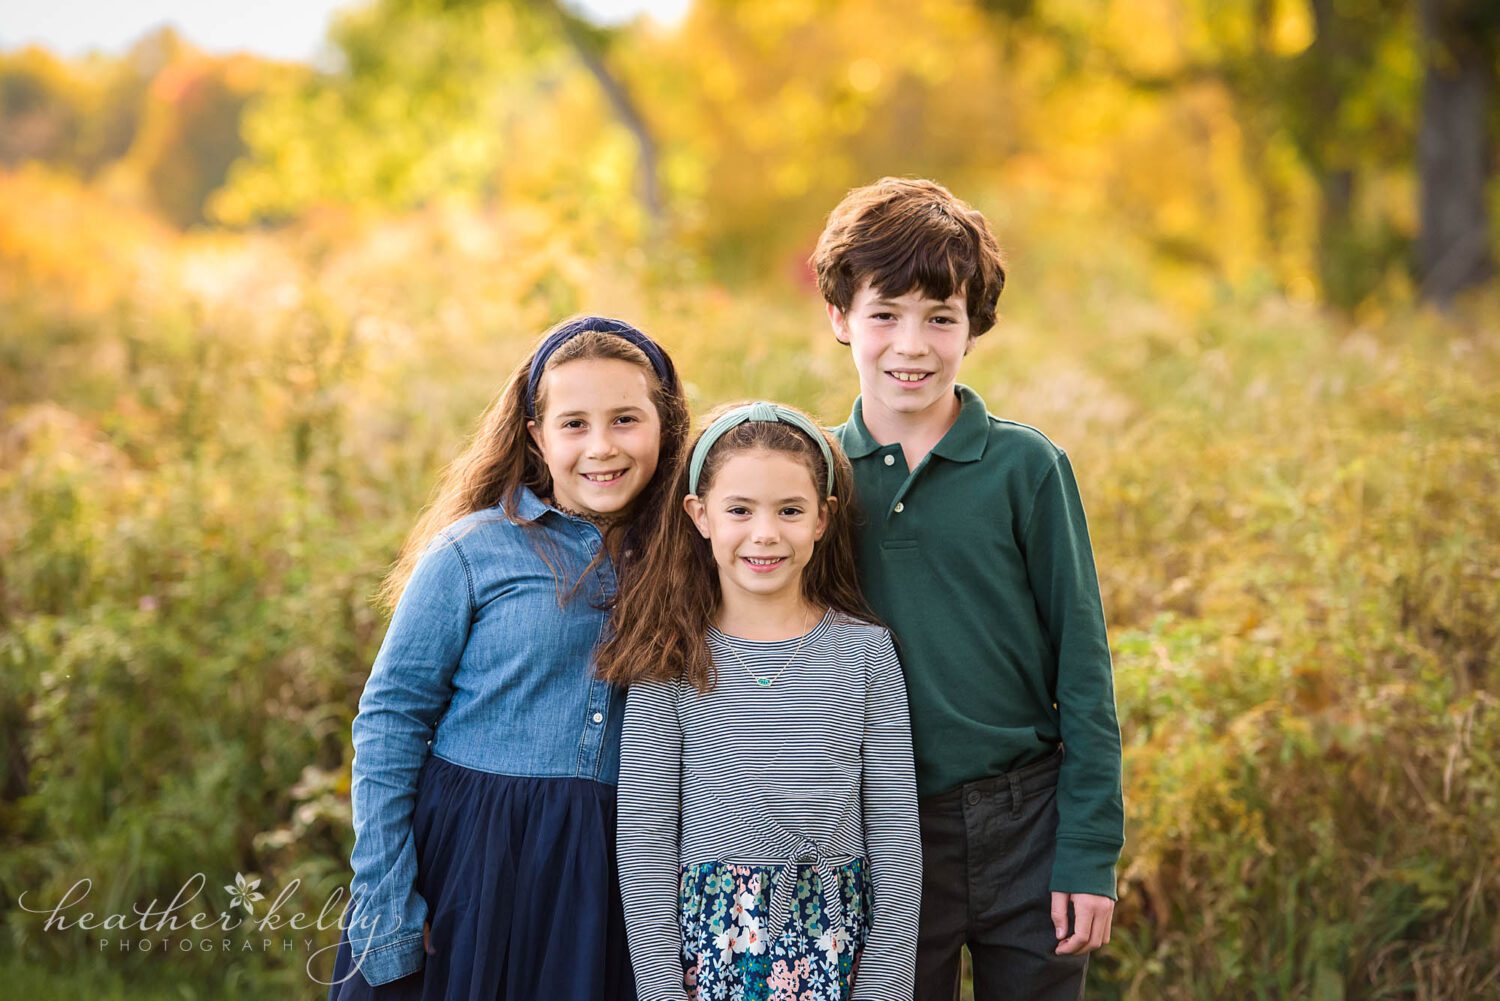 2022 fall mini sessions ct. Three siblings, two girls and older brother standing near each other looking at the camera. Pretty fall colors in the background